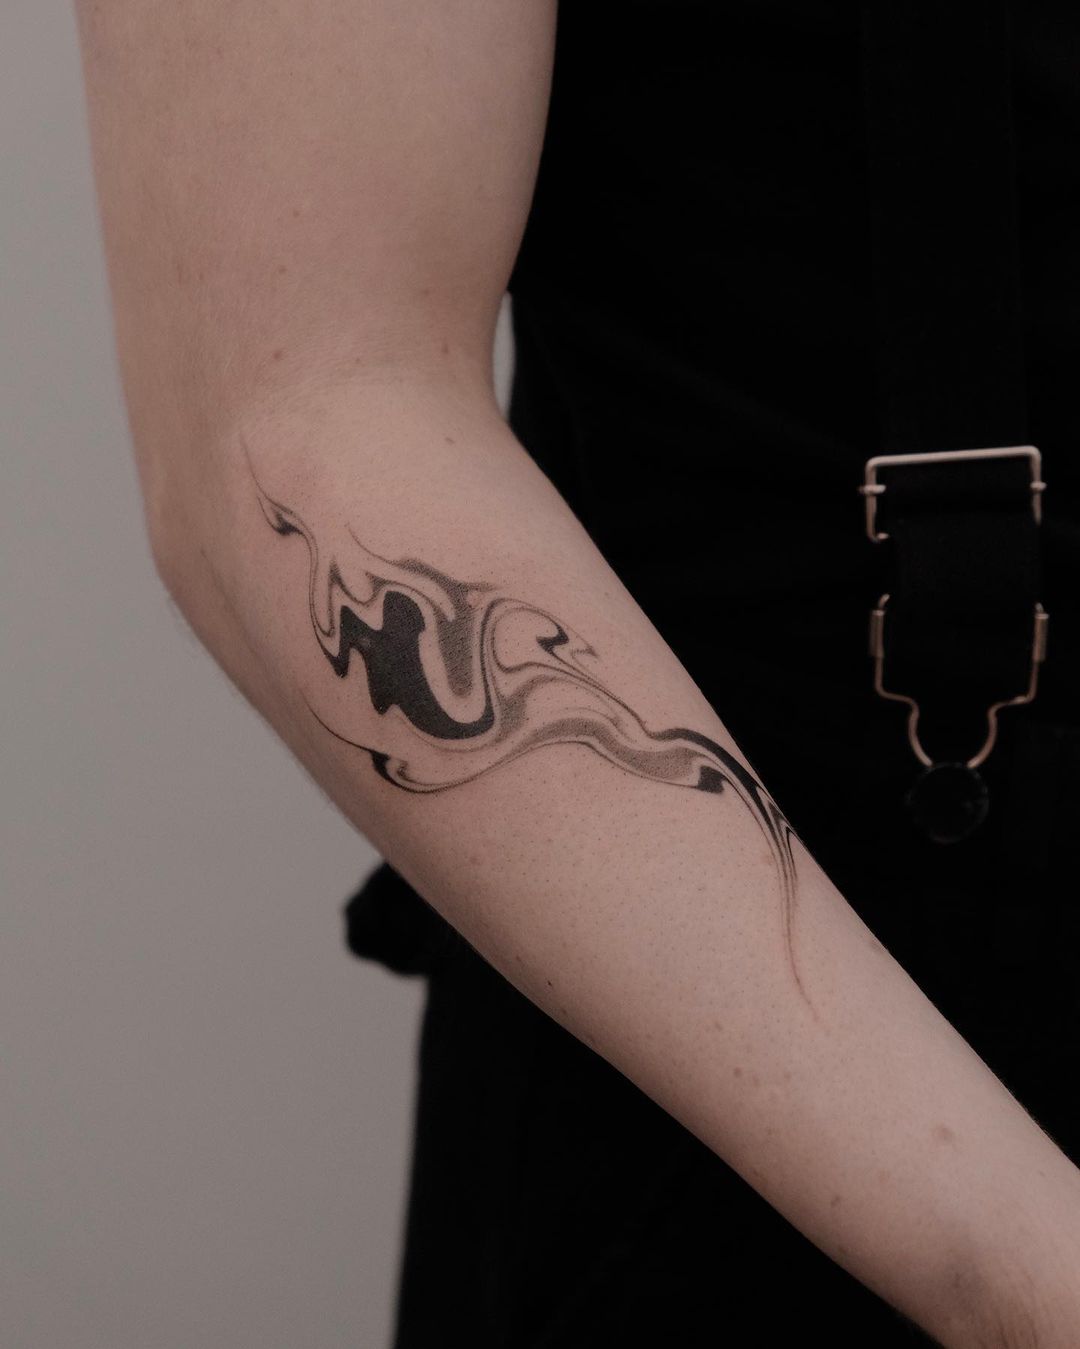 Brightly Colored Abstract Tattoos Influenced by Cubism